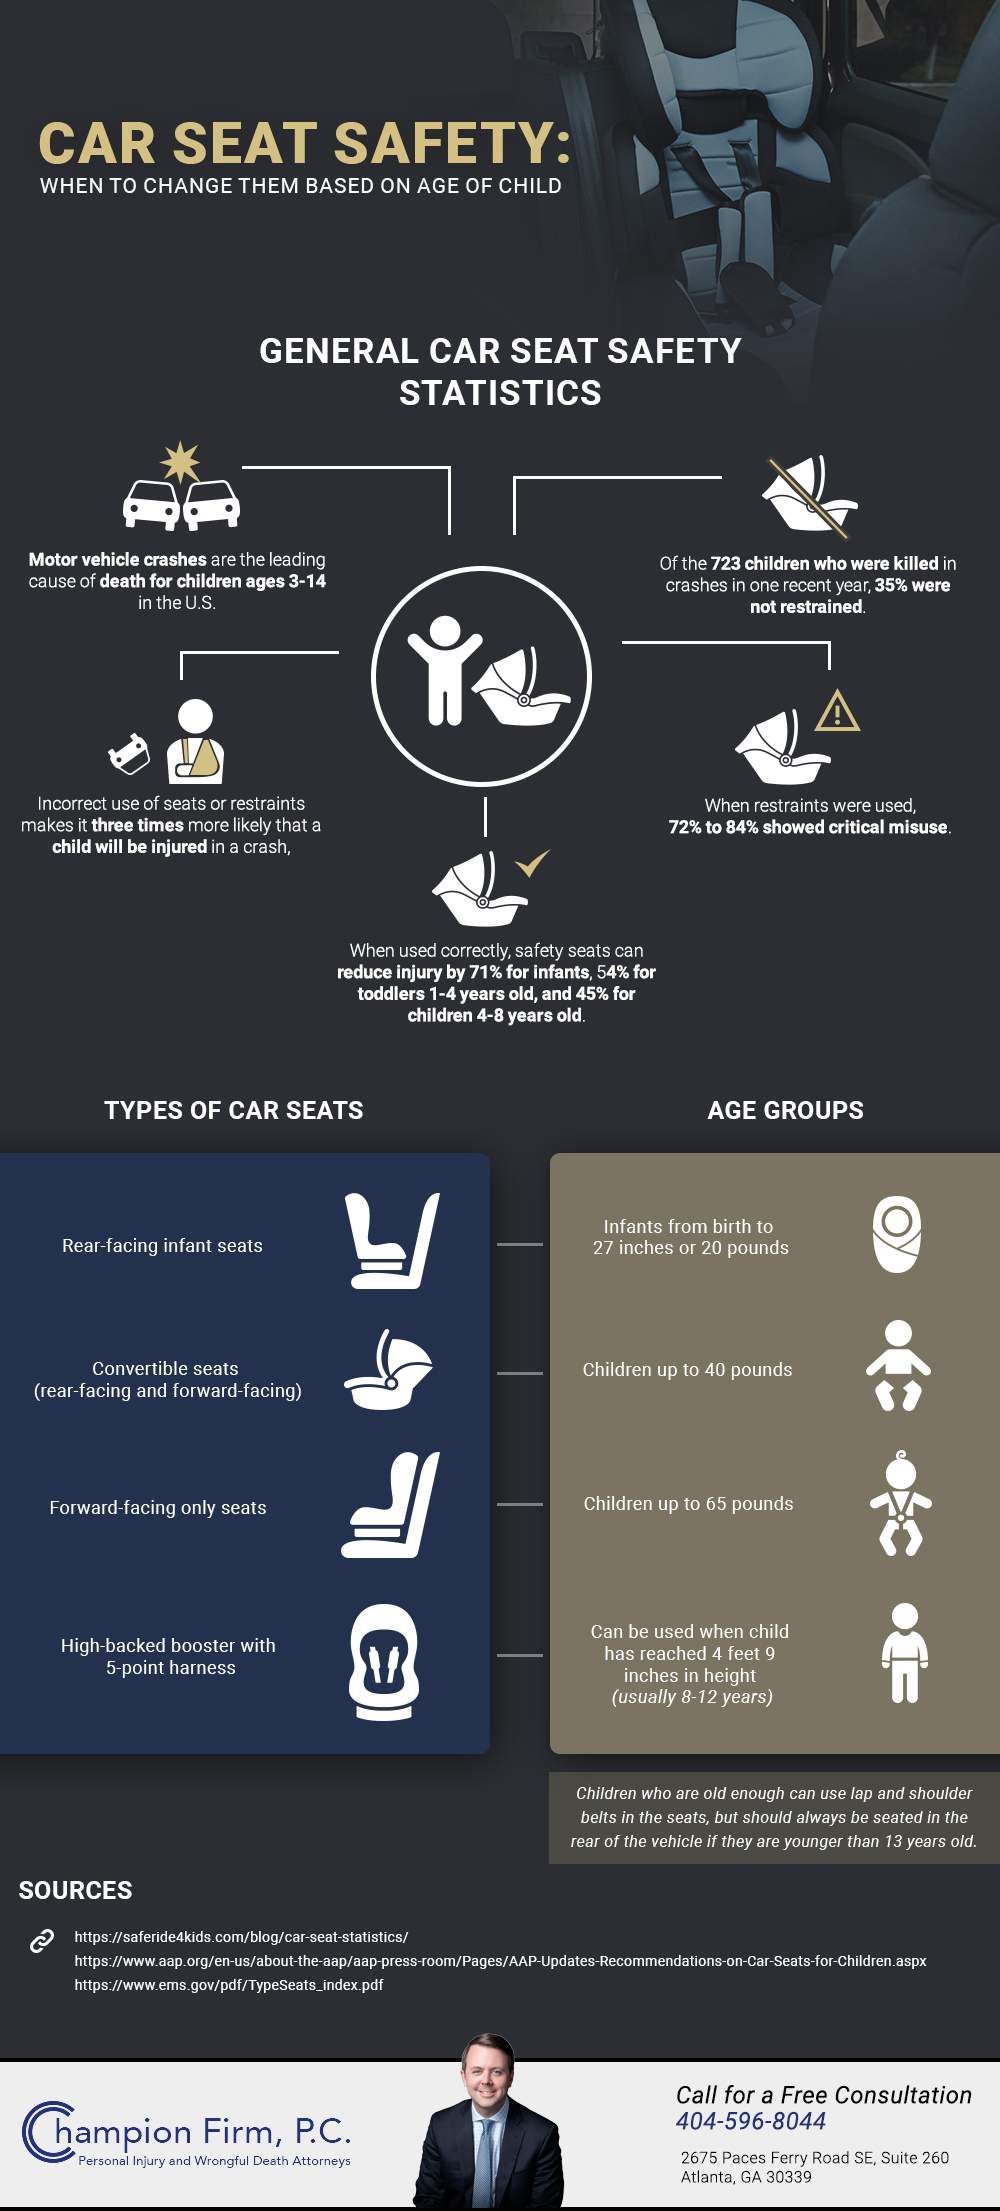 Top Car Seats Safety Solutions For Parents